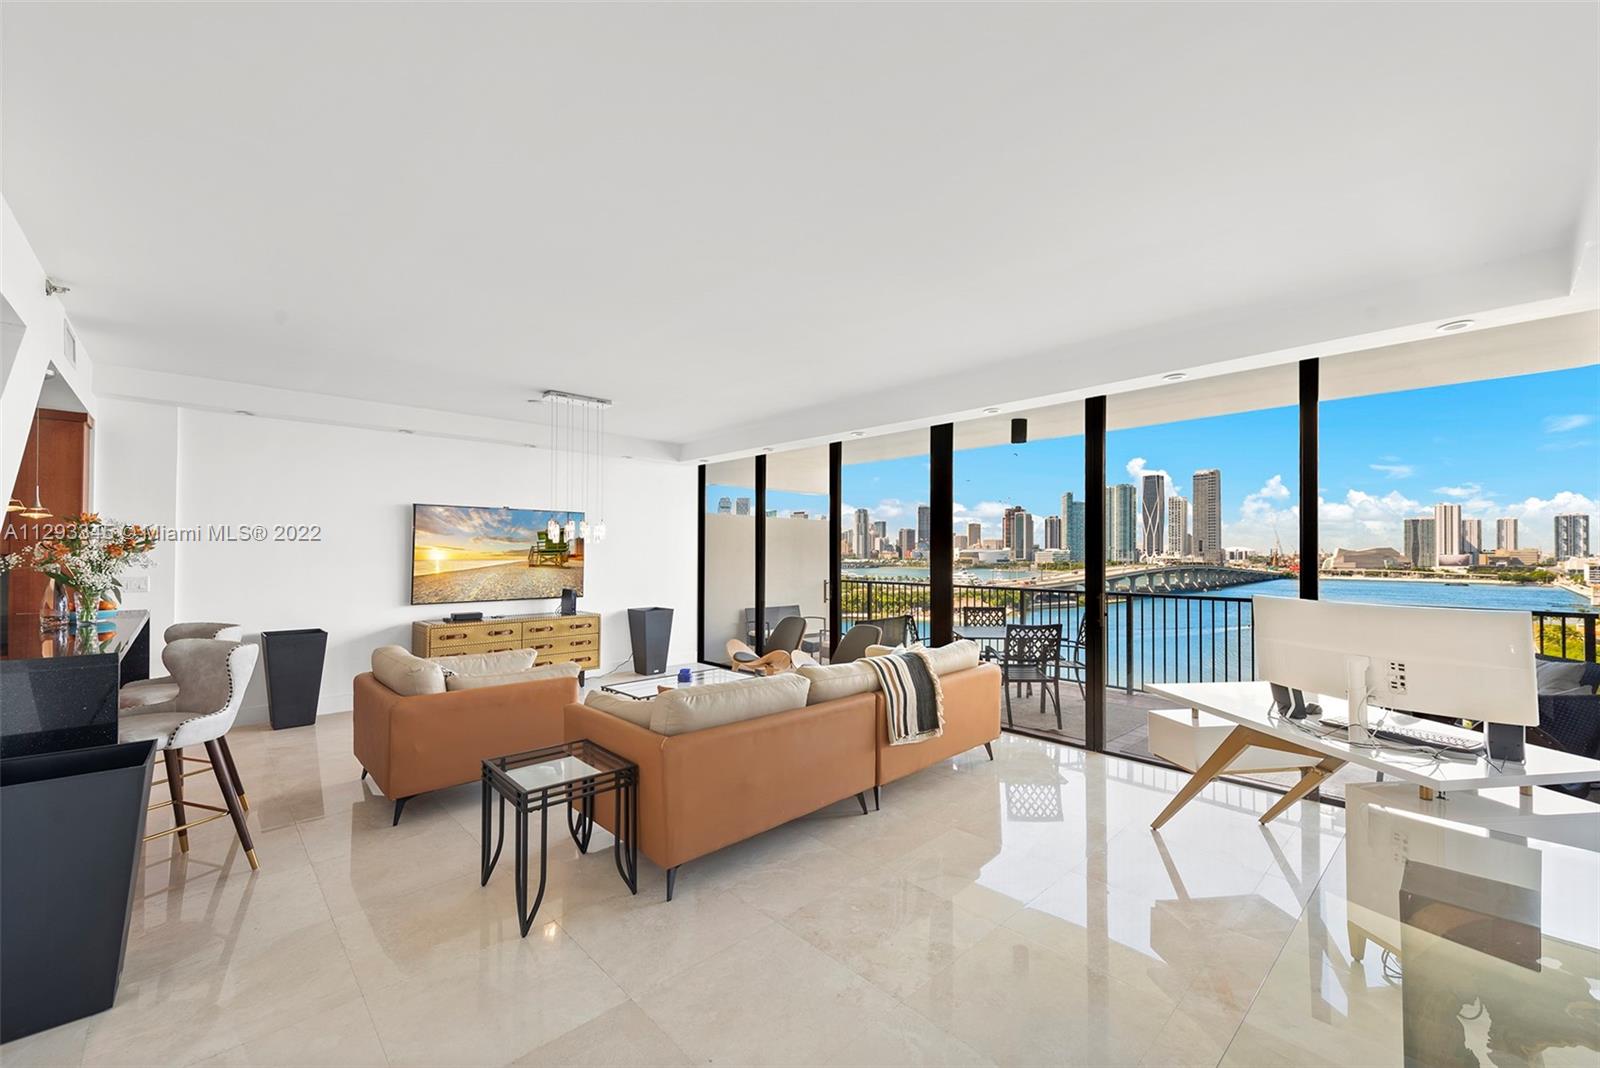 Beautifully appointed 2-story residence w/ unobstructed bay & skyline views! This luxurious 1 BD/1.5 BA unit boasts over 1,000 Sq.Ft. of living space, two spacious terraces, floor-to-ceiling glass windows, open living & dining rooms, kitchen w/ breakfast bar & wine fridge, oversized patio on the main level w/ spectacular sunset views, & spacious bedroom suite upstairs w/ large private terrace! Located on the Venetian Islands, one of Miami Beach's most desired locations, between South Beach & Miami's downtown arts & design areas! This full service luxury building offers security, concierge, doorman, 2 pools w/hot tub, tennis courts, basketball court, barbecue area, fitness complex w/ spa & sauna, children's play area, dog park, complimentary guest parking, & more! ALSO AVAILABLE FOR RENT!